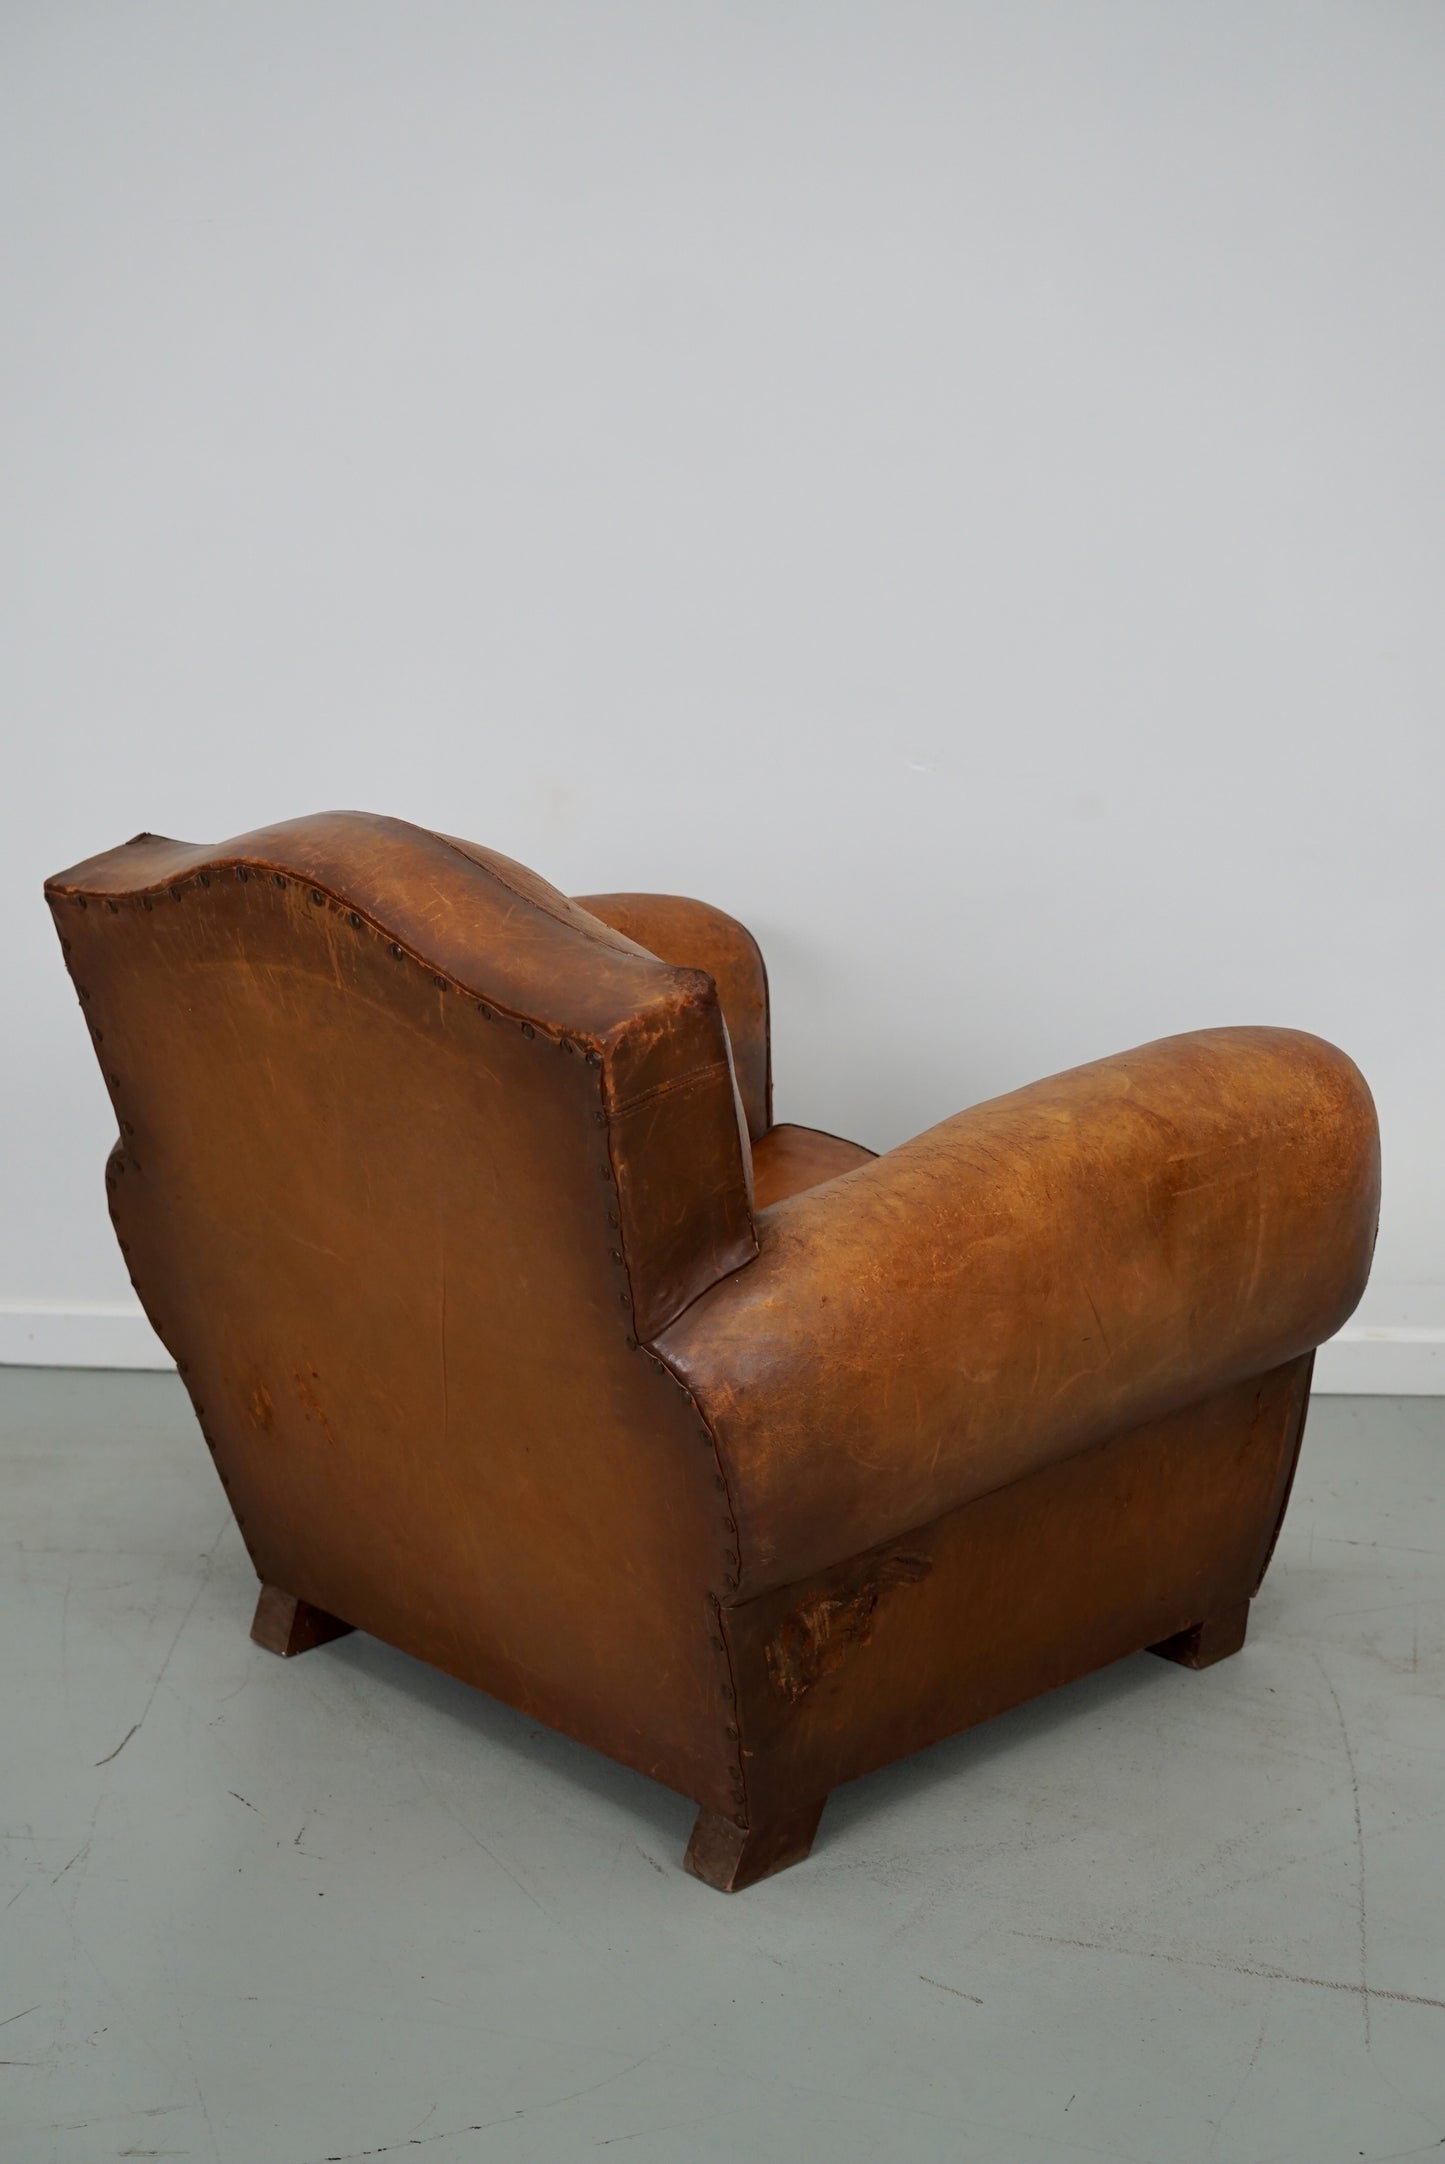 Vintage French Moustache Back Cognac-Colored Leather Club Chair, 1940s